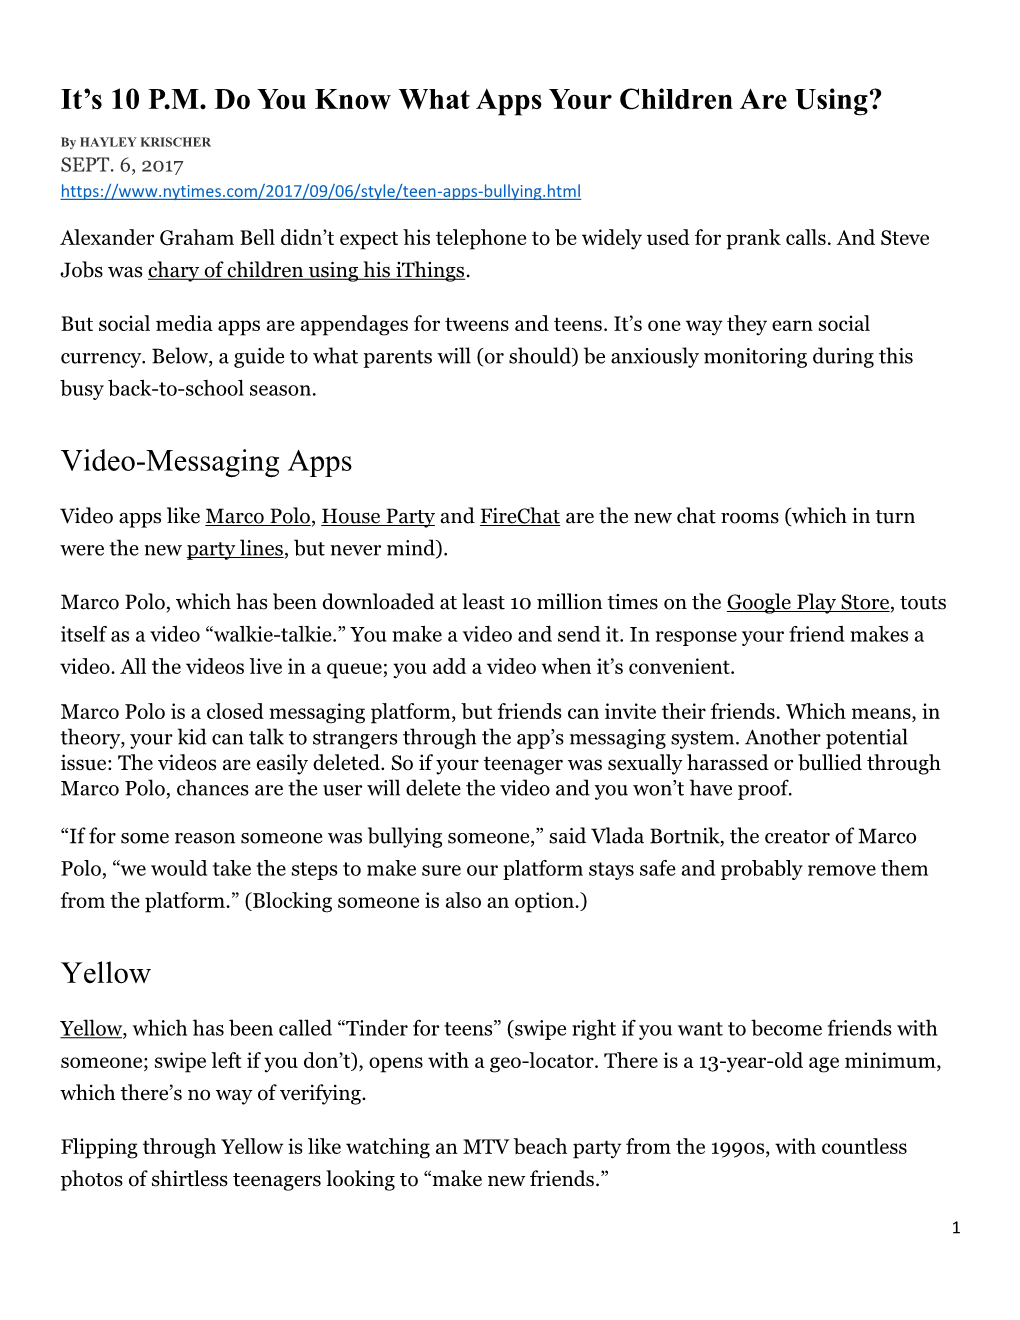 Video-Messaging Apps Yellow